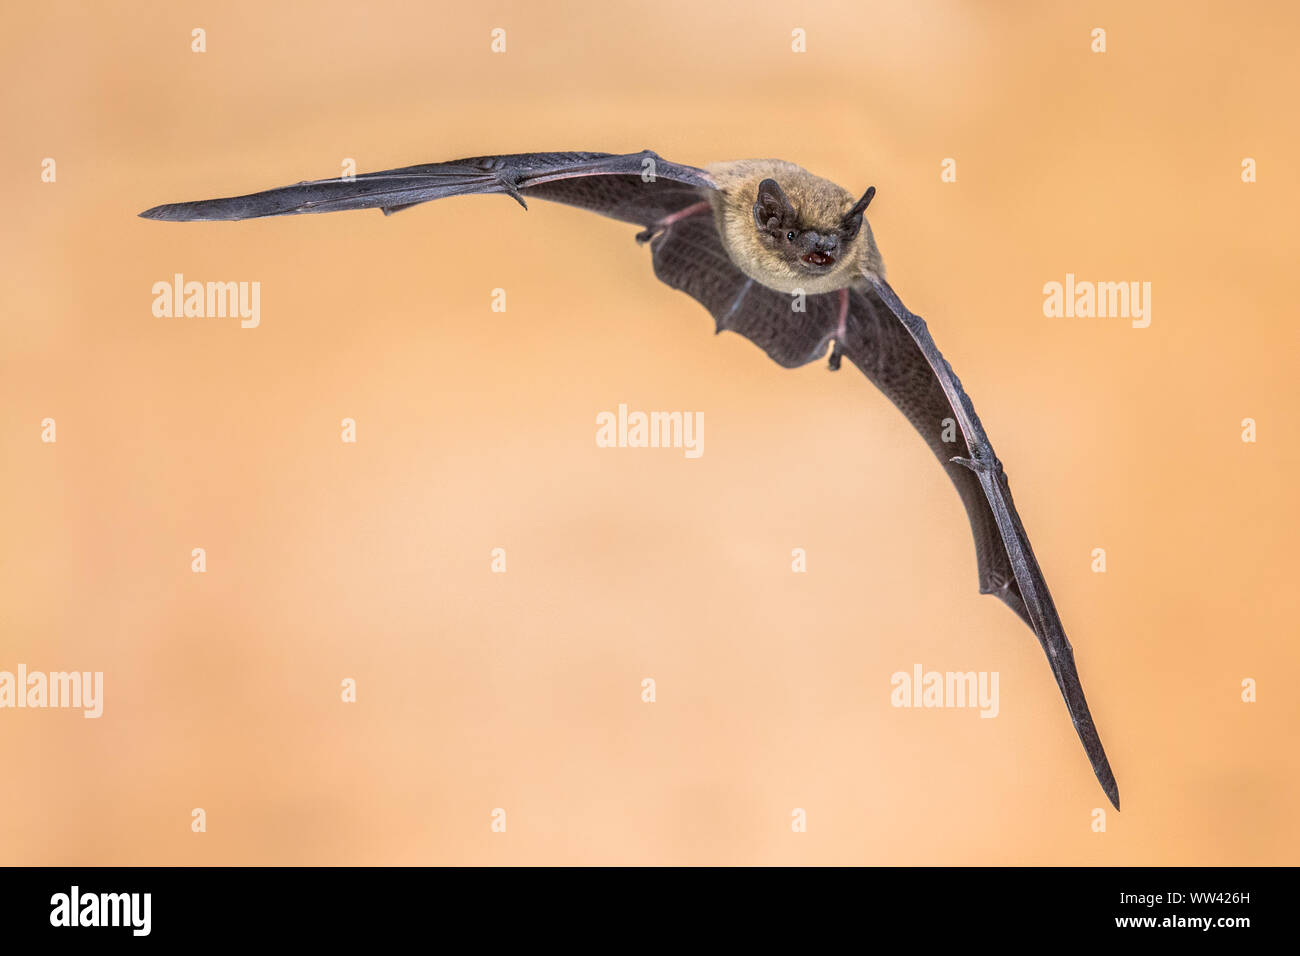 Flying Pipistrelle bat (Pipistrellus pipistrellus) action shot of hunting animal on brown background. This species is know for roosting and living in Stock Photo